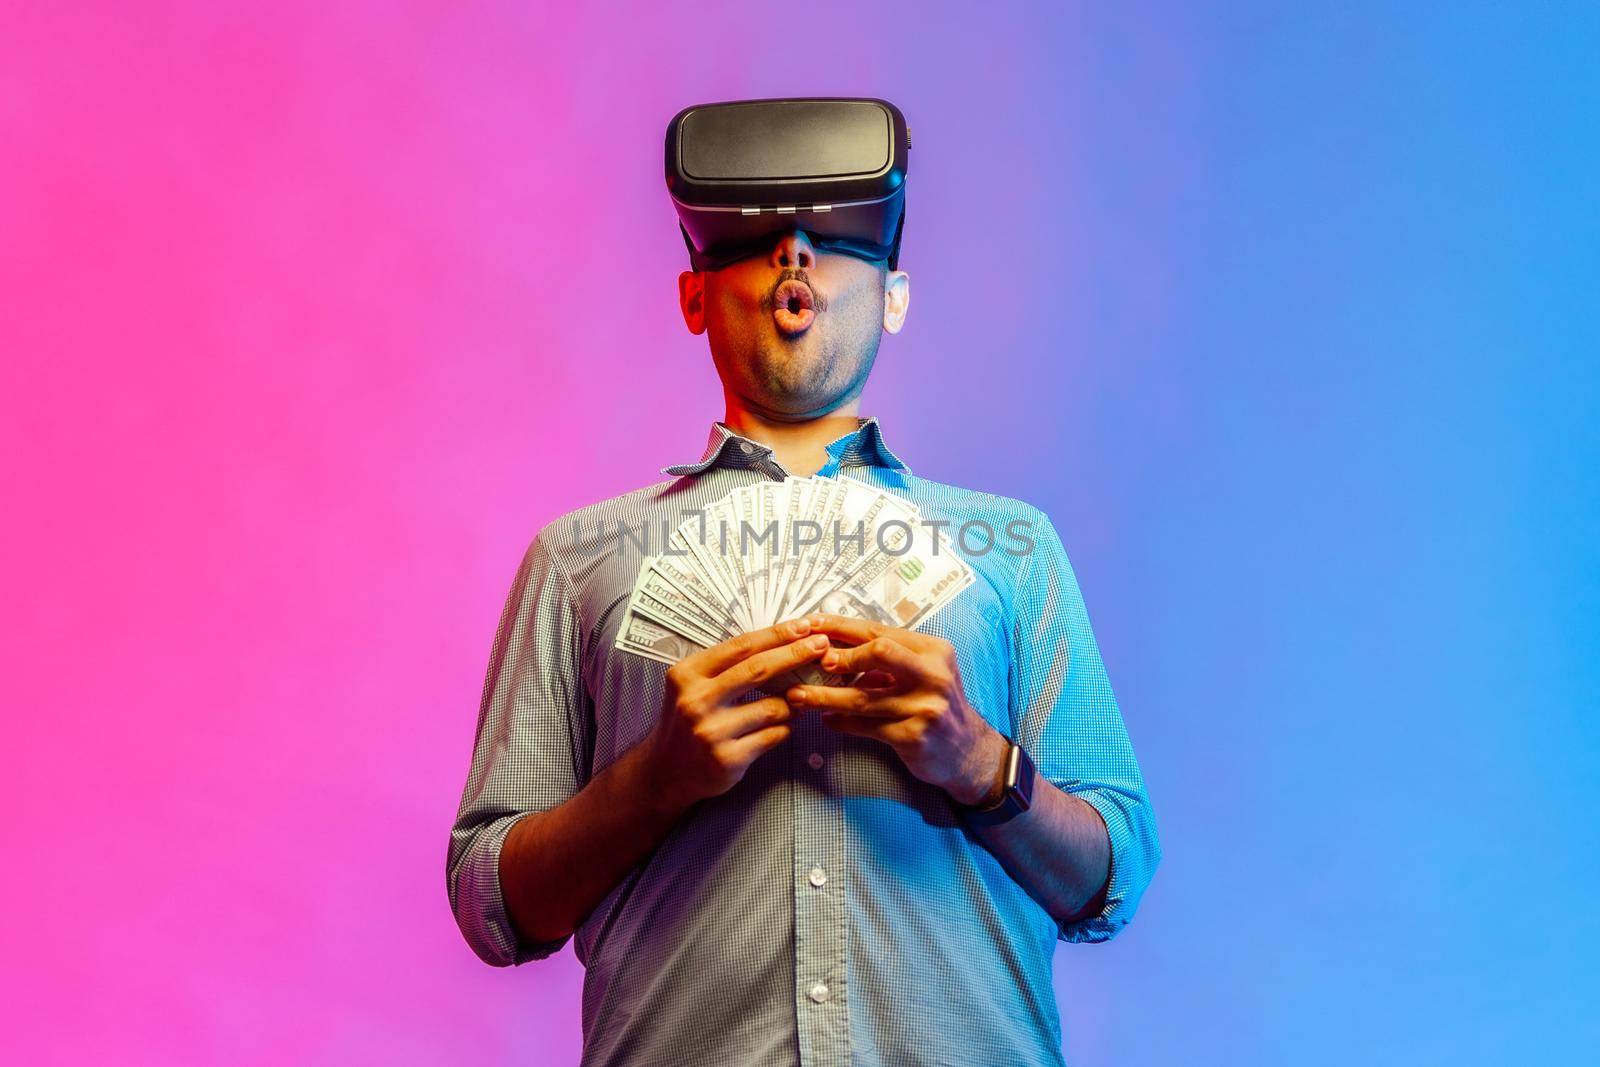 Portrait of amzed man in shirt to get money, holding dollars, illusion of rich millionaire, playing virtual reality game. Indoor studio shot isolated on colorful neon light background.